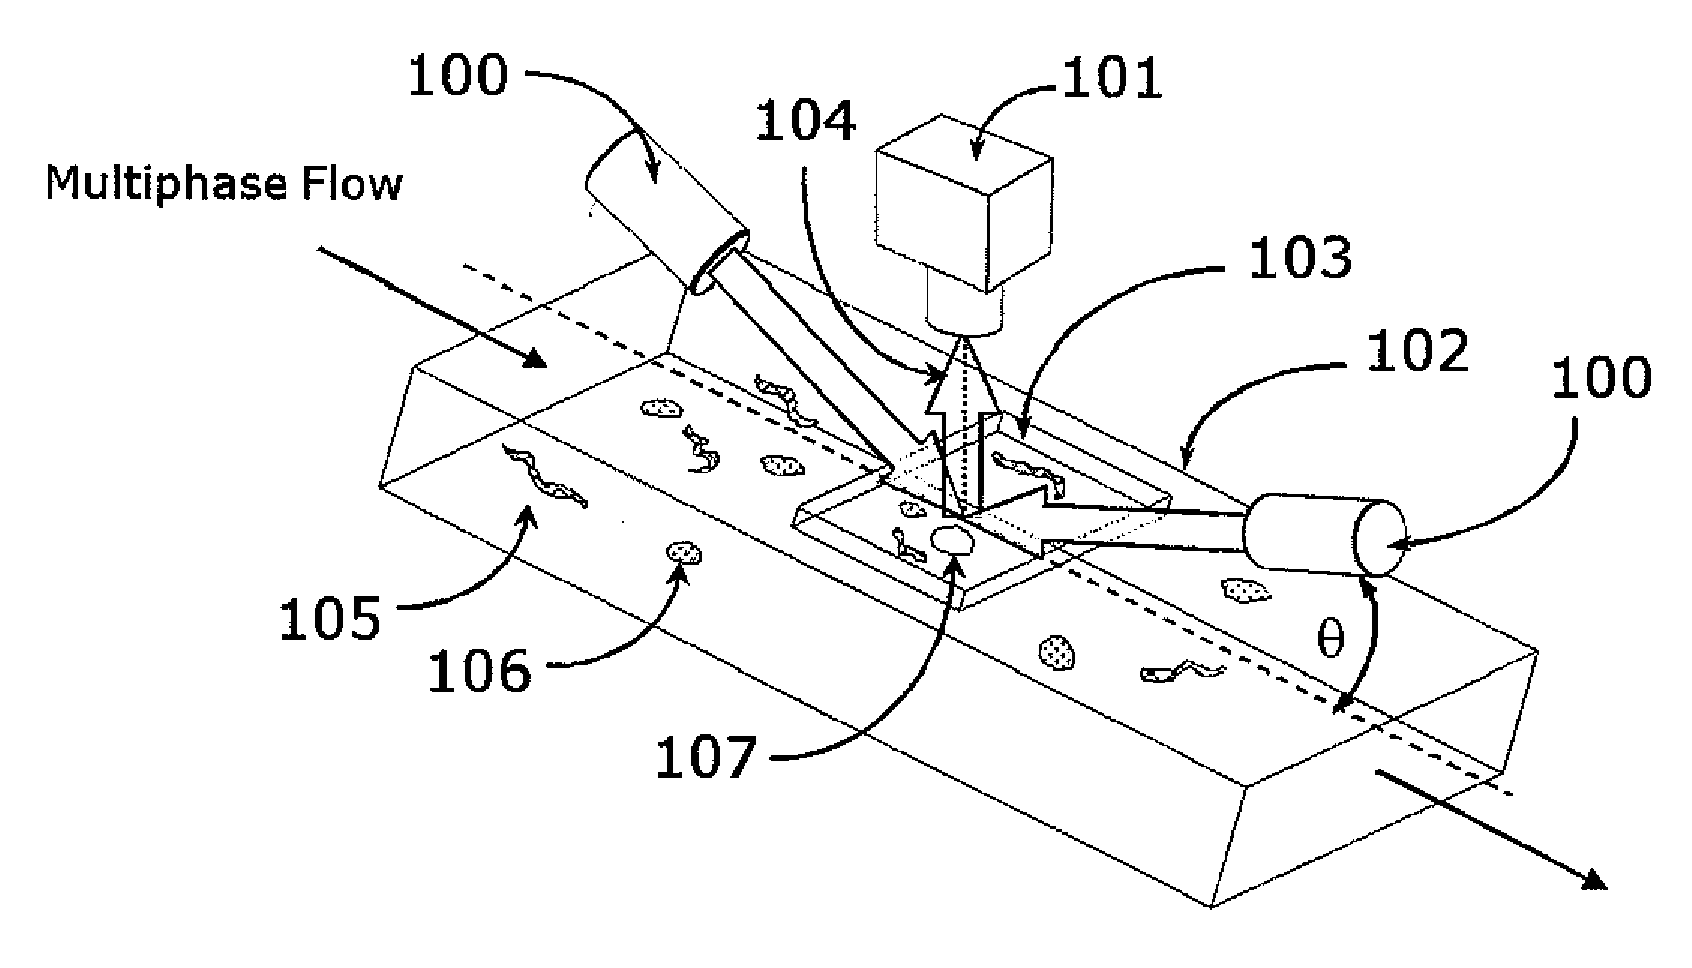 Method of monitoring macrostickies in a recycling and paper or tissue making process involving recycled pulp